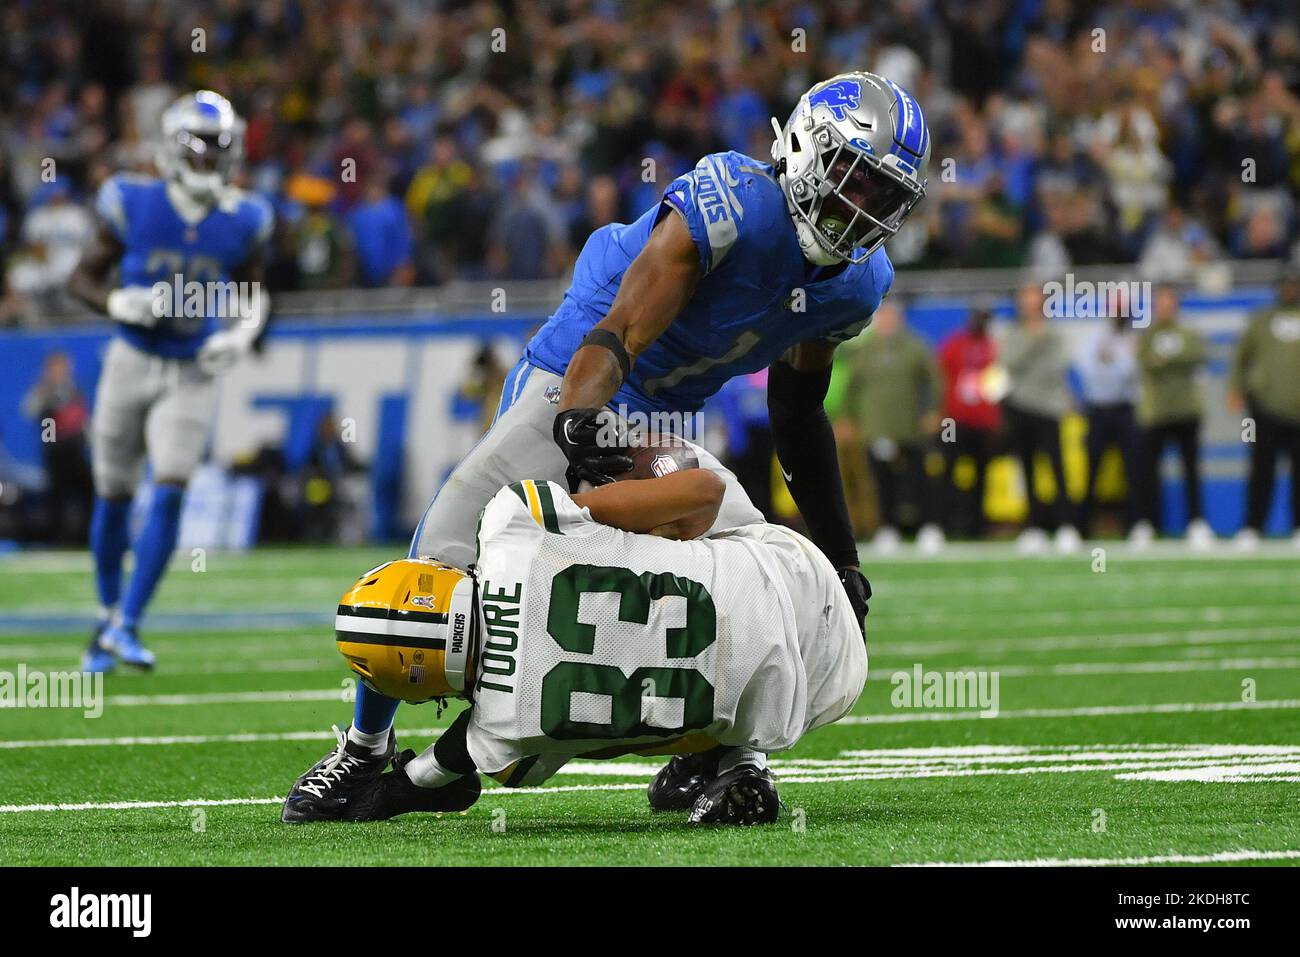 DETROIT, MI - NOVEMBER 06: Detroit Lions Cornerback (1) Jeff Okudah wrenches the ball loose before Green Bay Packers WR Samori Toure (83) hits the ground causing a fumble during the game between Green Bay Packers and Detroit Lions on November 6, 2022 in Detroit, MI (Photo by Allan Dranberg/CSM) Credit: Cal Sport Media/Alamy Live News Stock Photo